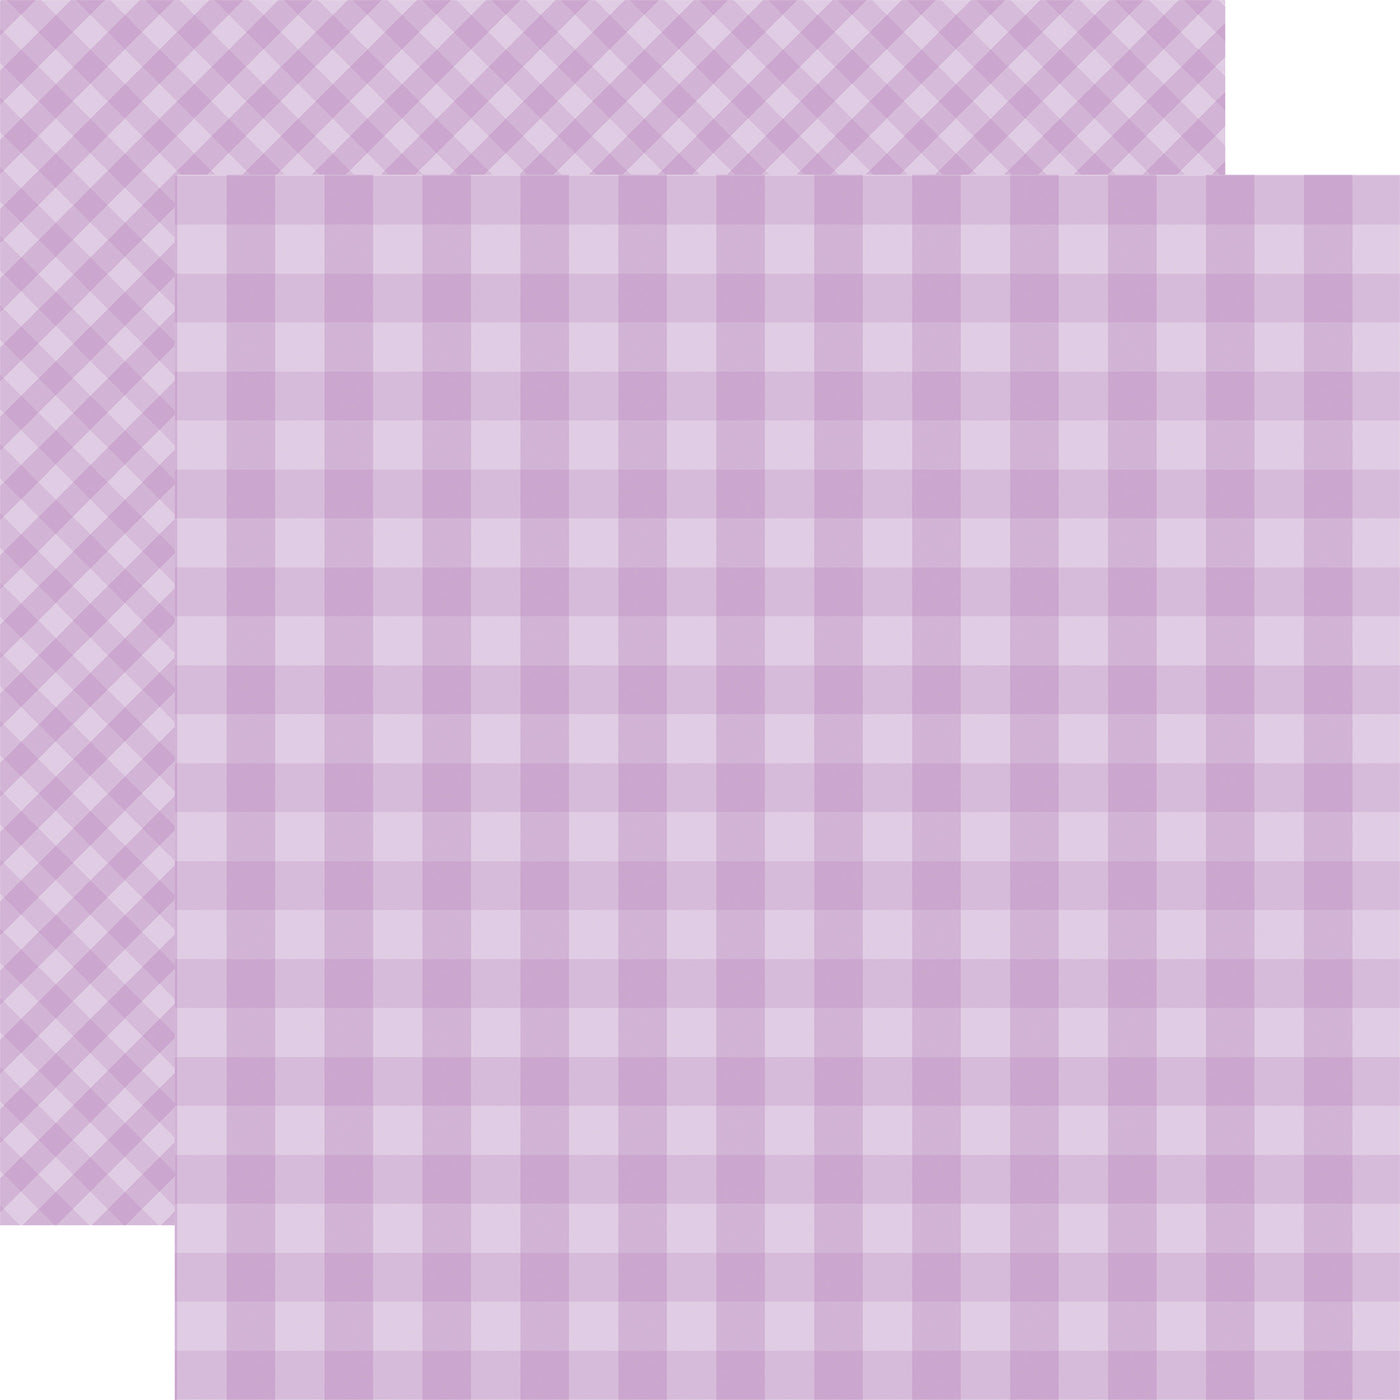 SPRING GINGHAM 12x12 Paper Pack - Echo Park